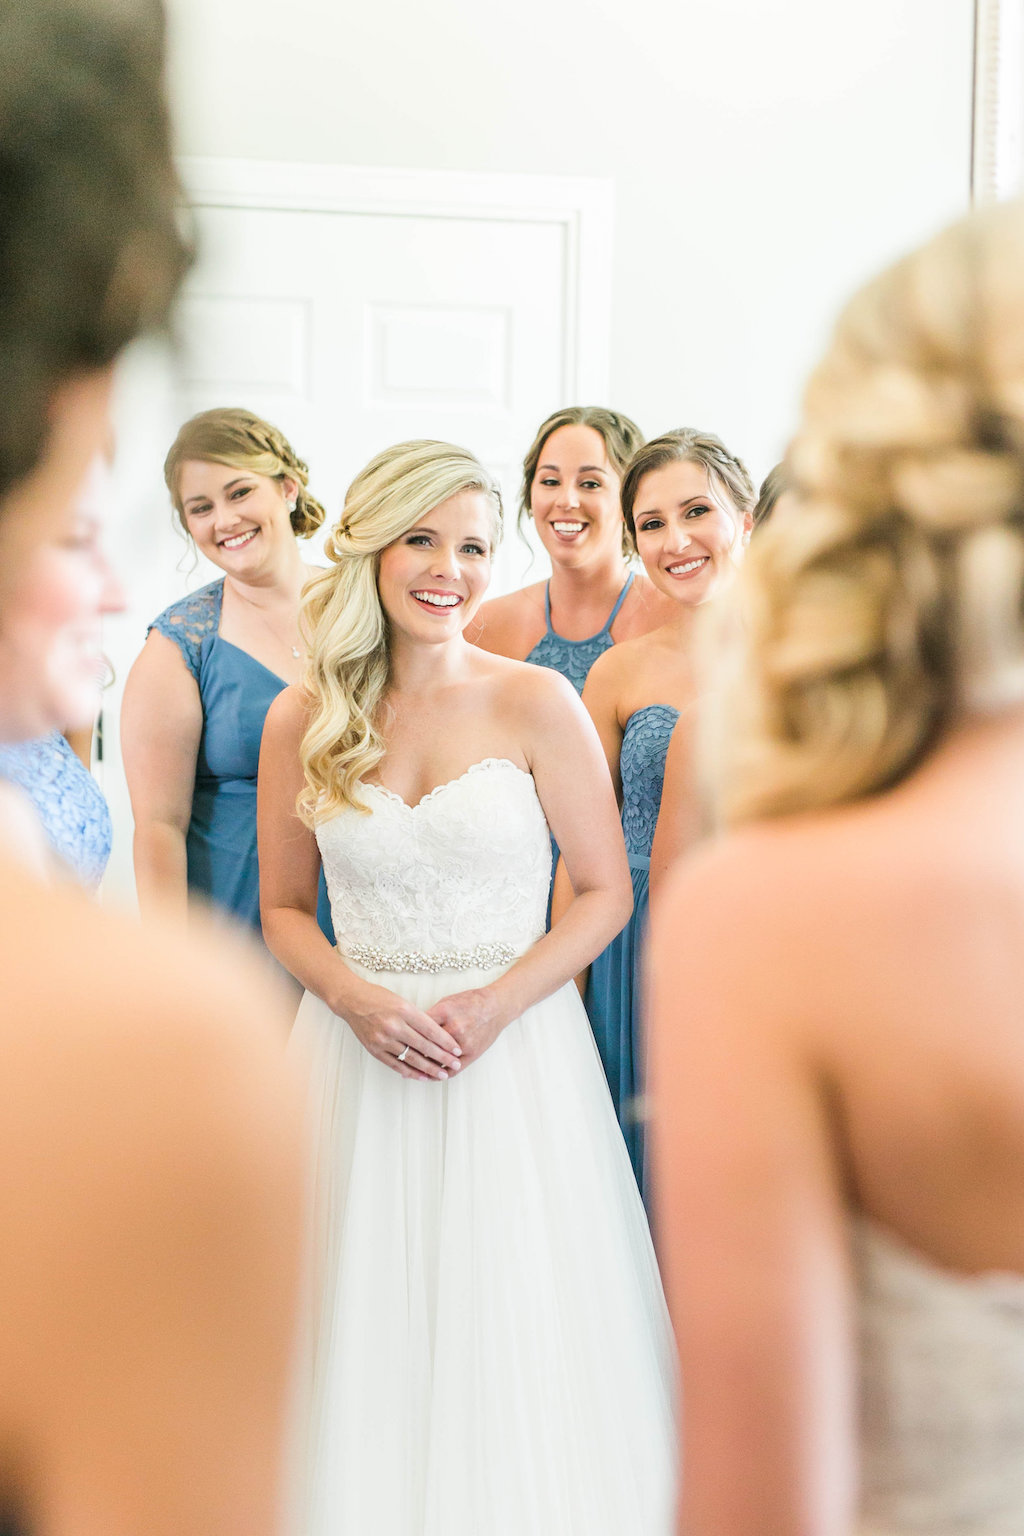 Bride First Look Wedding Portrait with Bridesmaids | Tampa Bay Hair and Makeup Femme Akoi